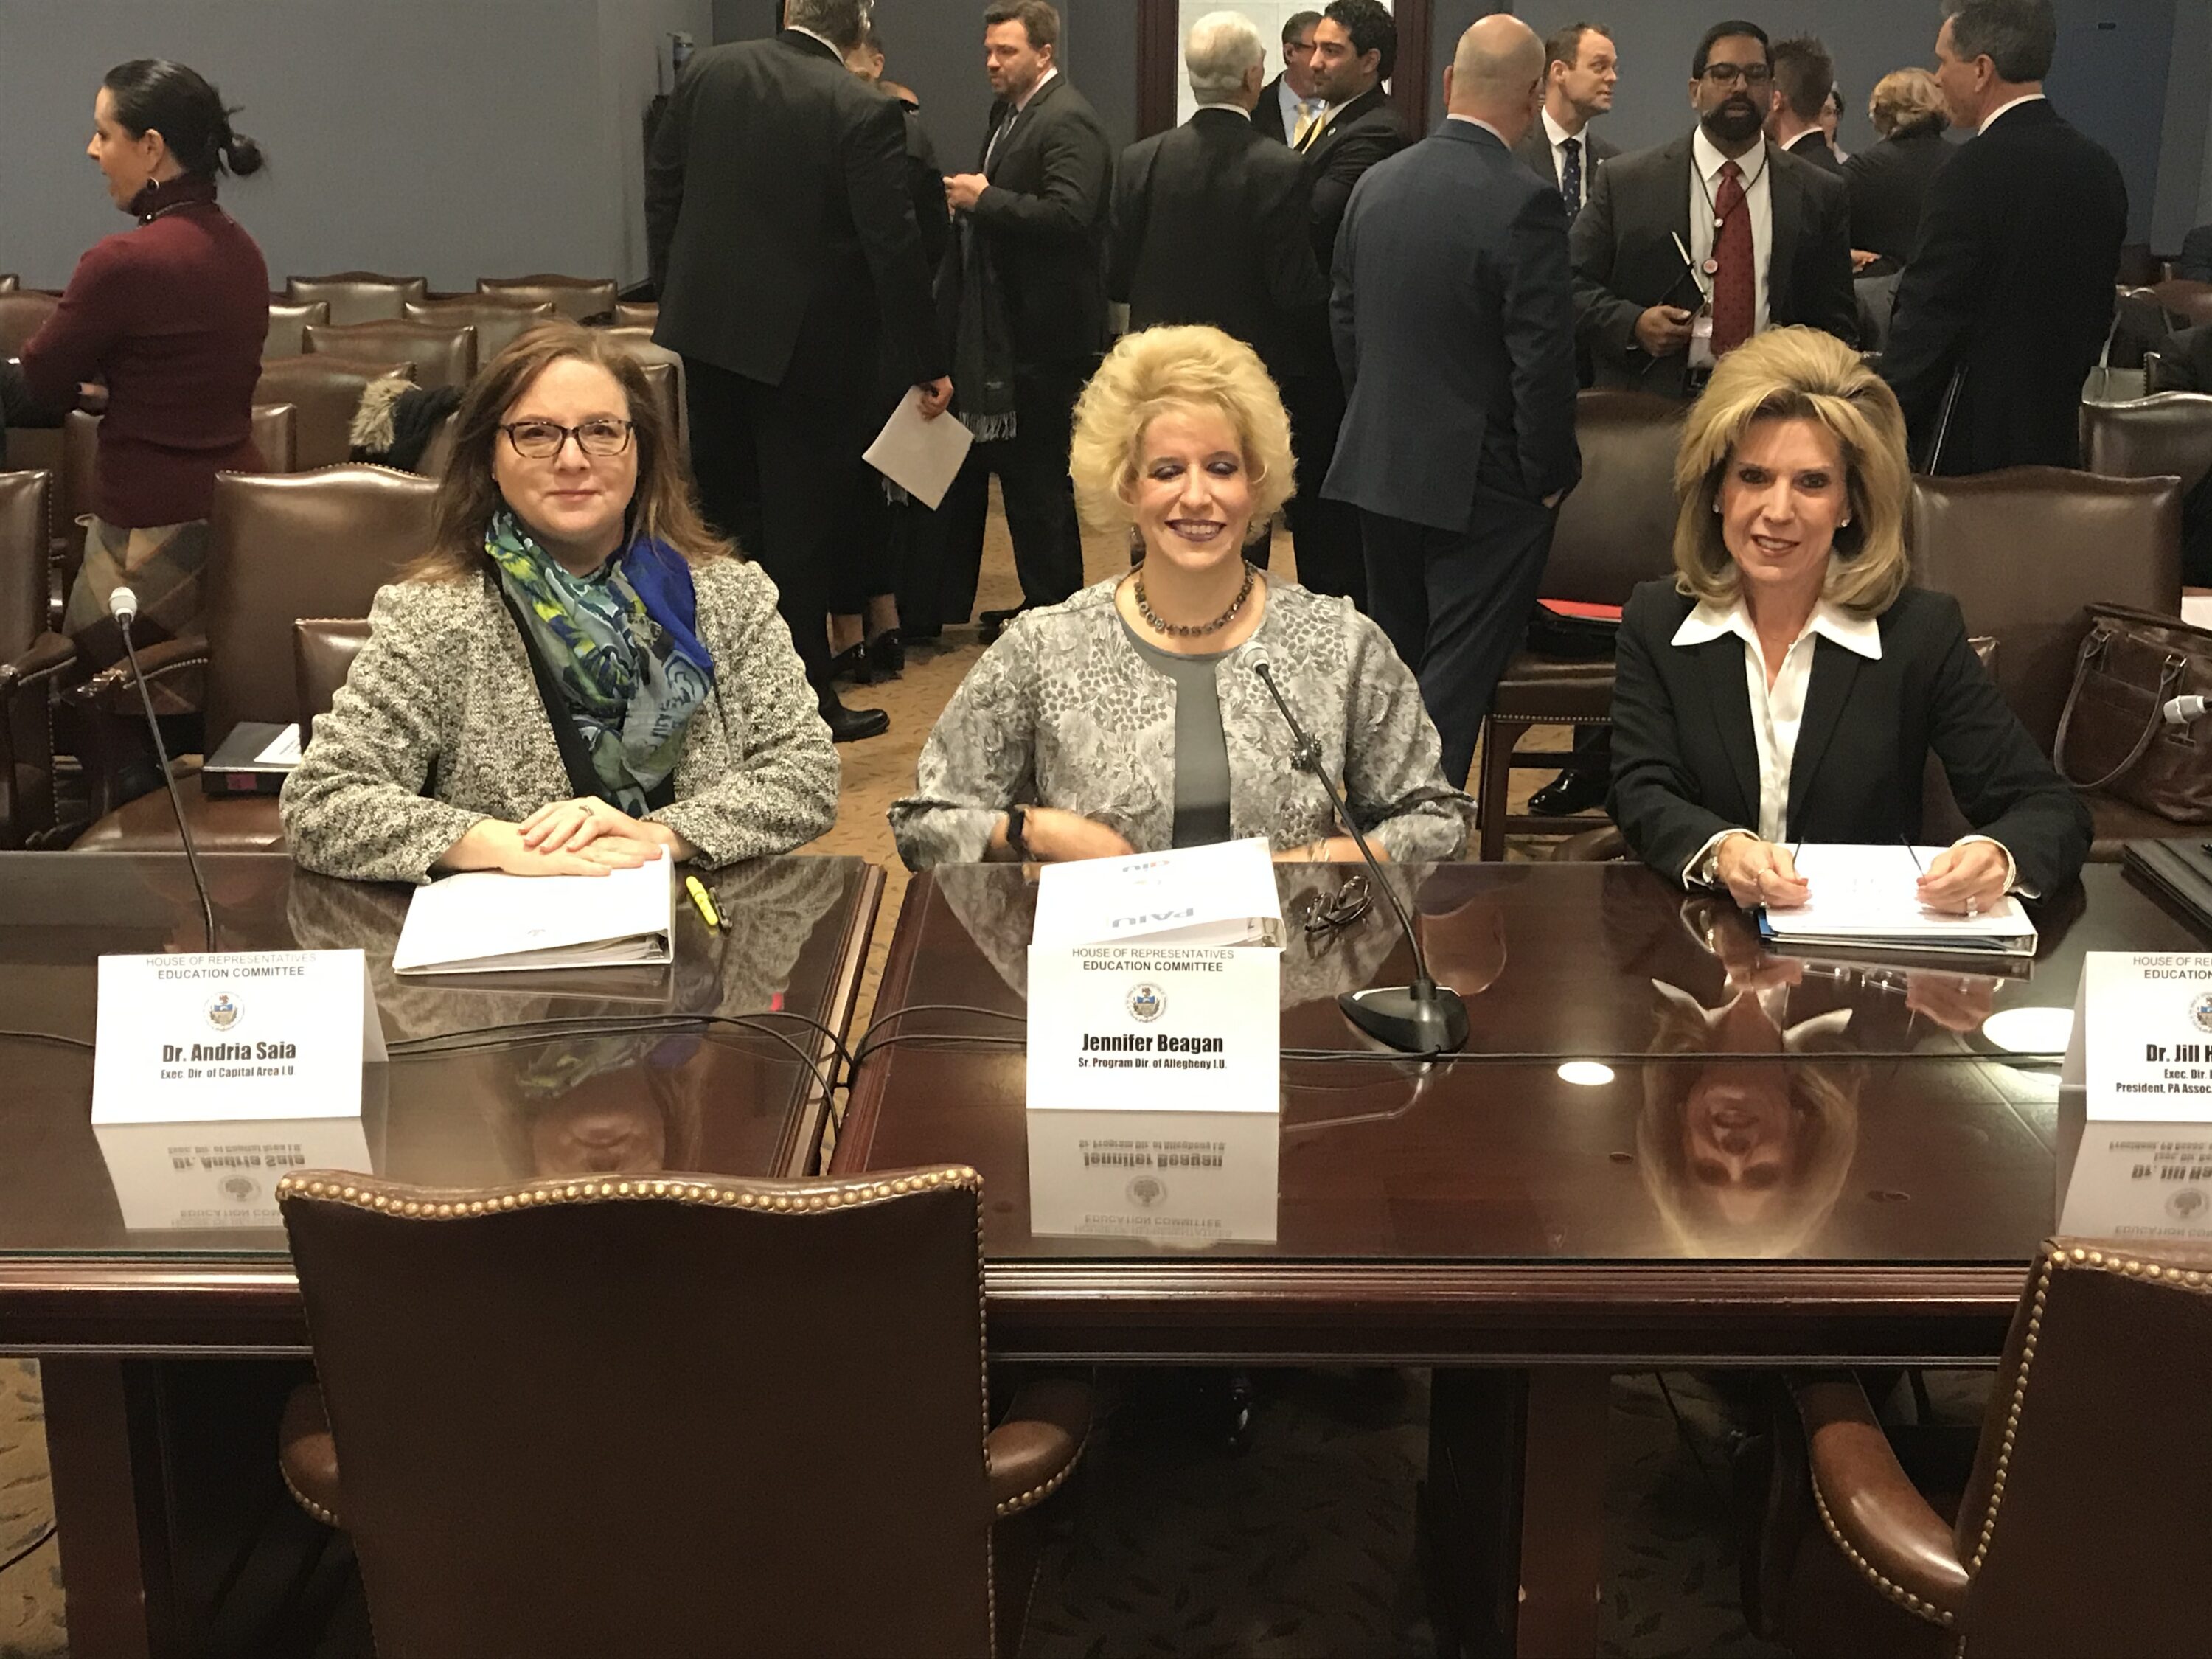 From left to right: Dr. Andria Saia, Executive Director of the Capital Area Intermediate Unit; Ms. Jennifer Beagan, Senior Program Director of the Allegheny Intermediate Unit; and Dr. Jill Hackman, Executive Director of the Berks County Intermediate Unit, testified on behalf of the Pennsylvania Association of Intermediate Units (PAIU) at a House Education Committee meeting on January 21.